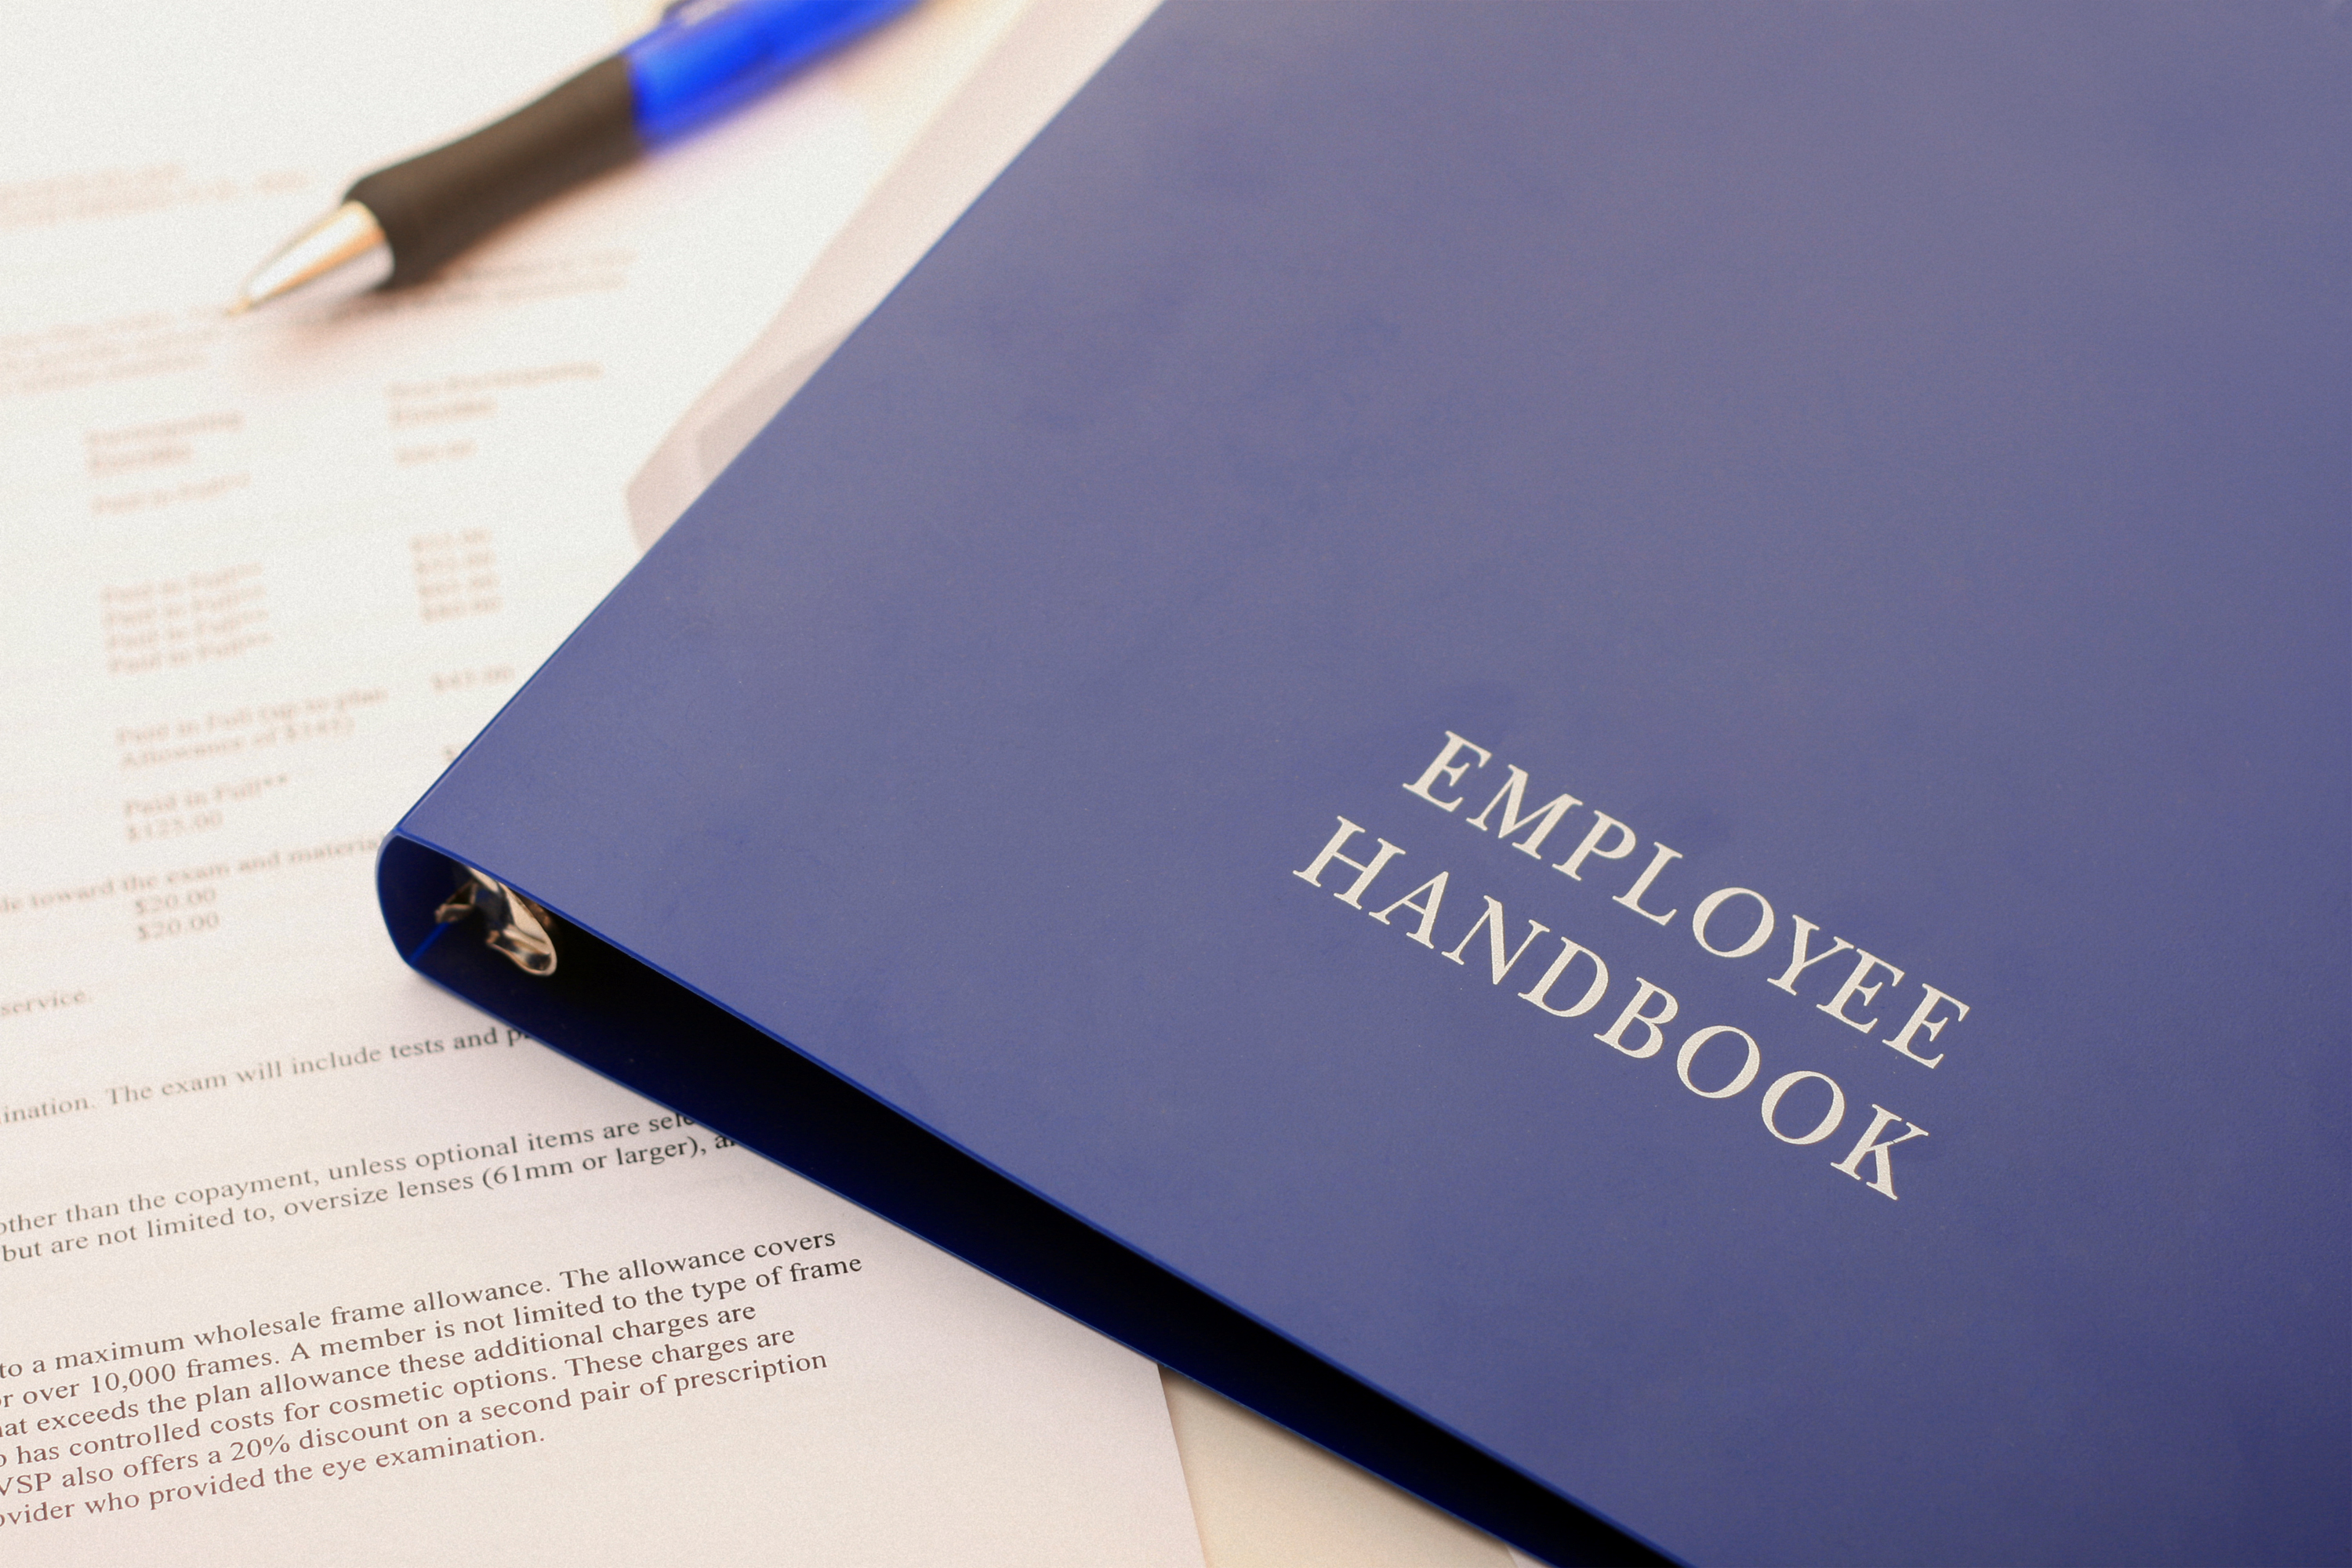 Handbook and paperwork for the newly hired.